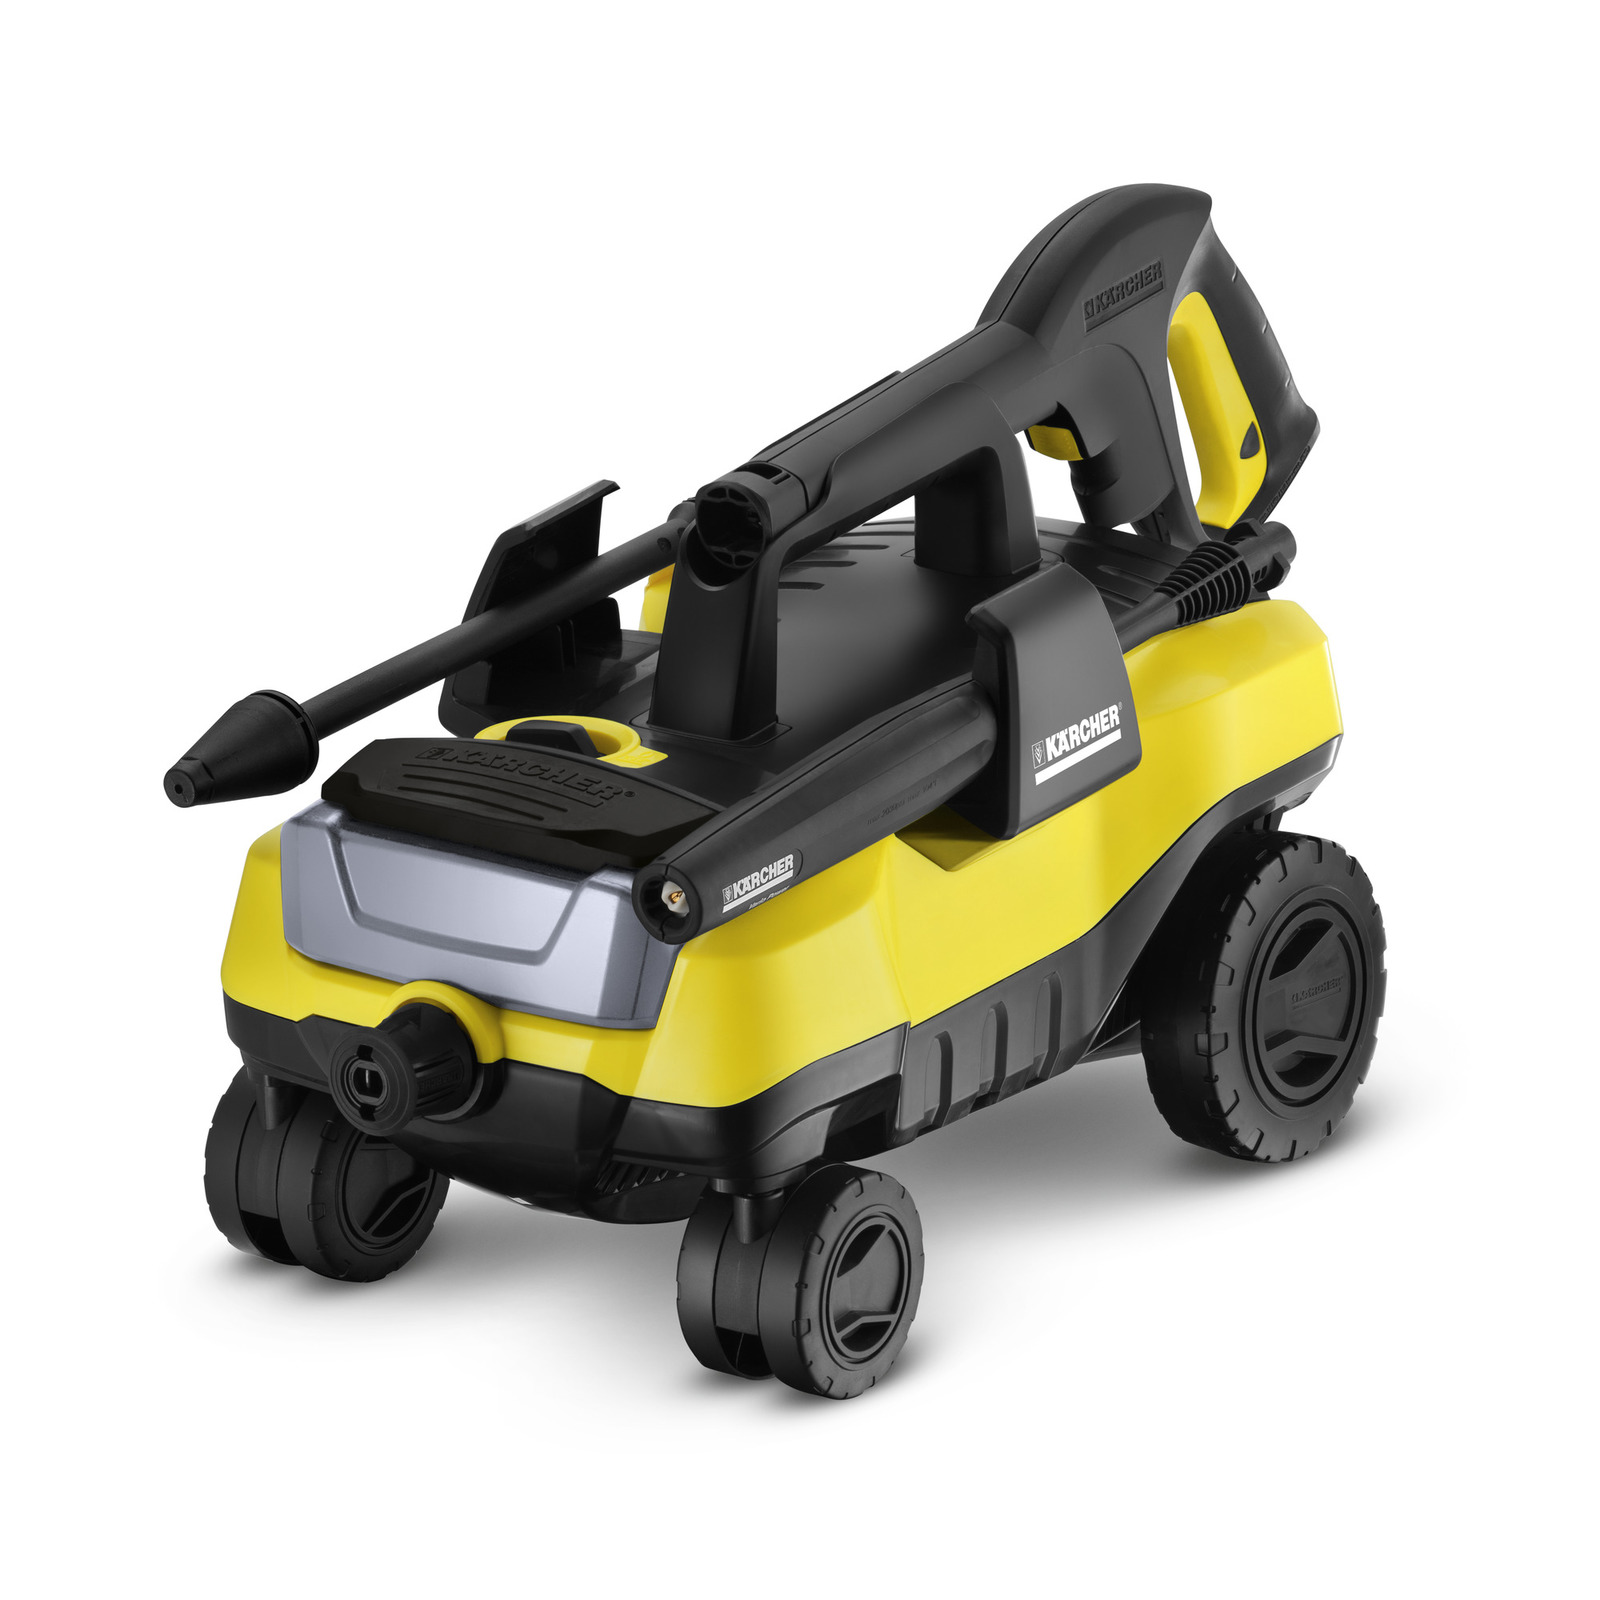 KARCHER K3 POWER CONTROL PRESSURE WASHER - 1 YEAR EXTRA WARRANTY (3 IN  TOTAL)